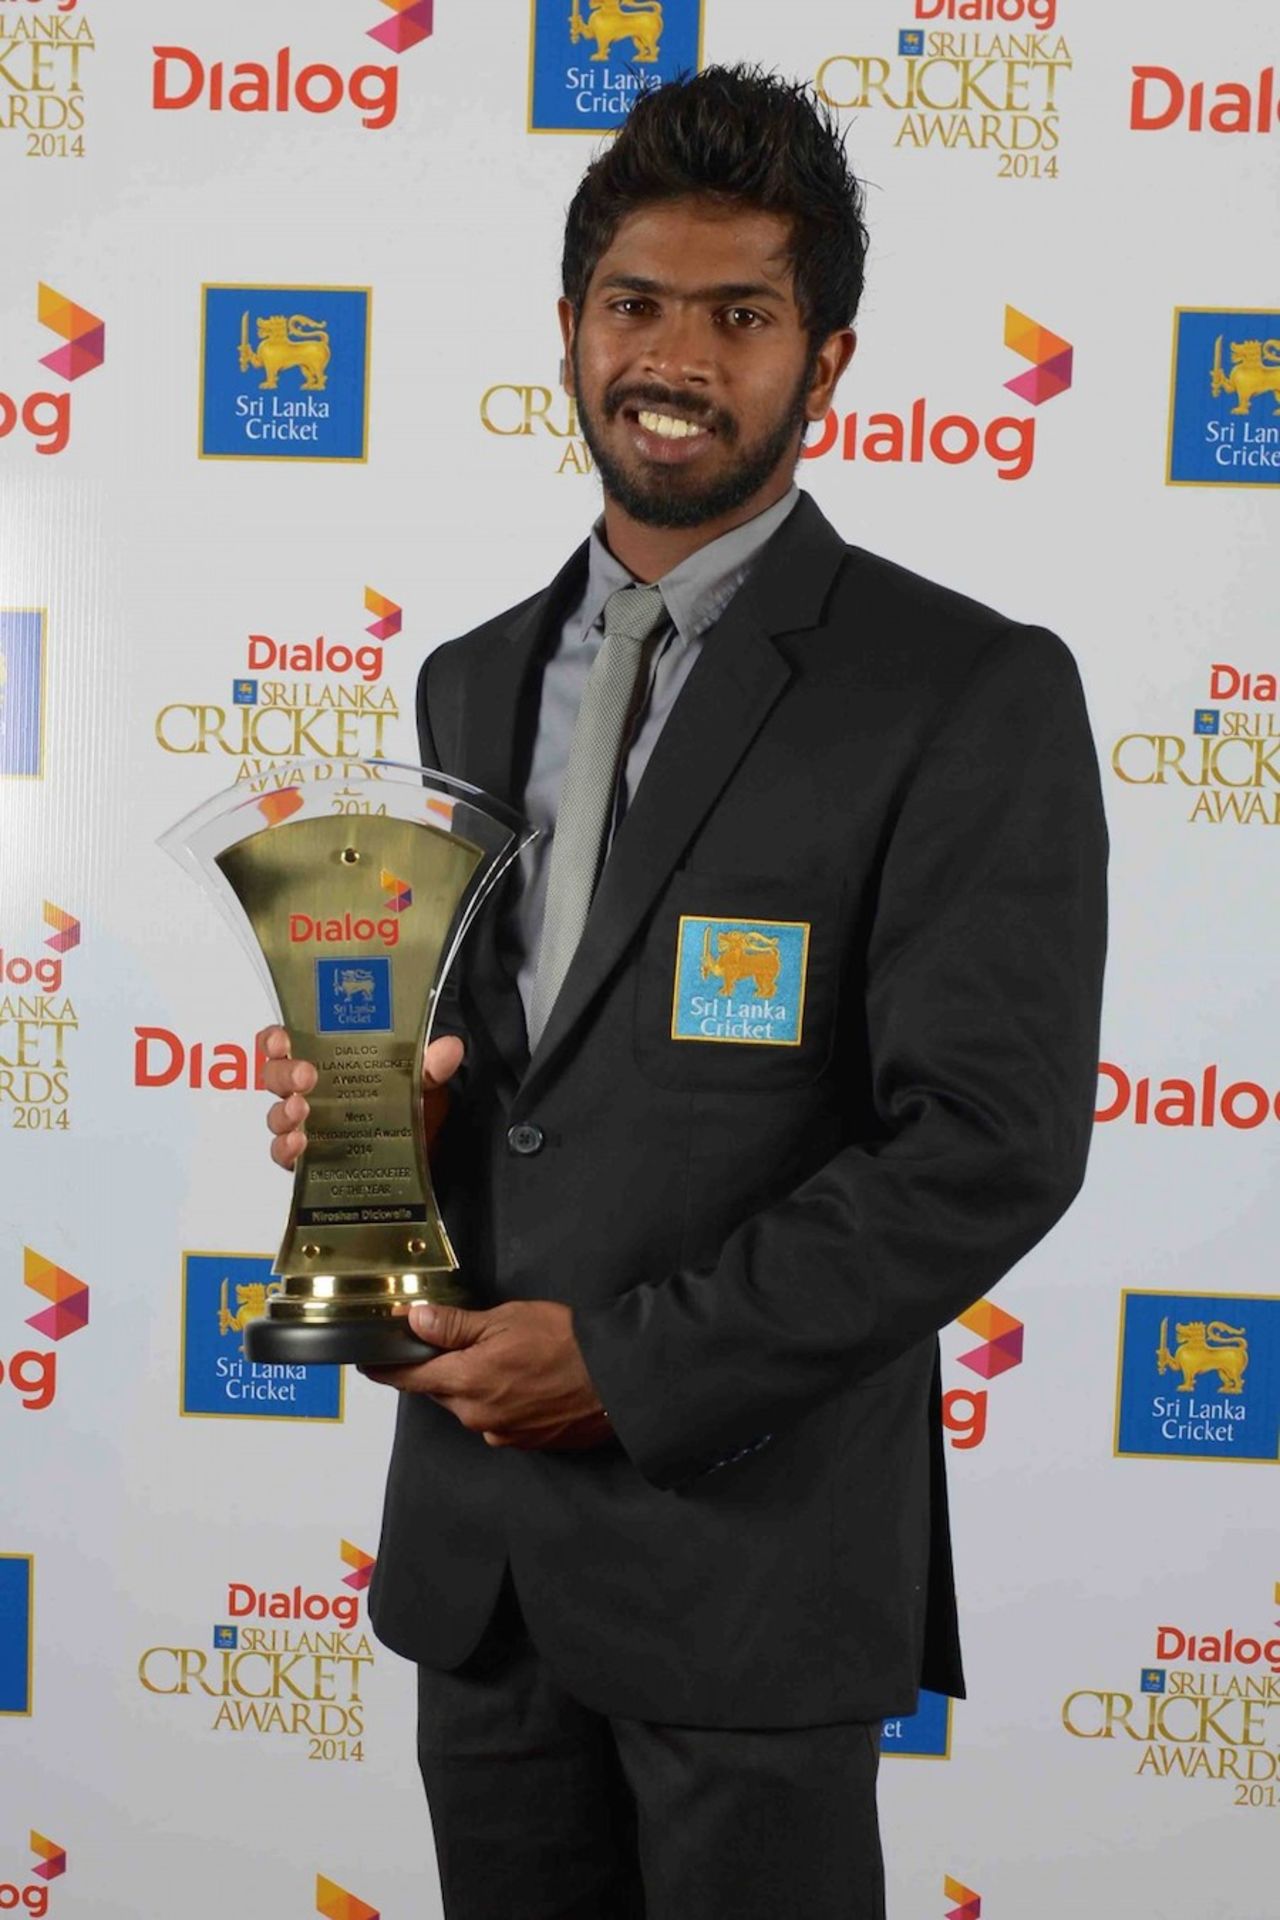 Niroshan Dickwella was named the Emerging Cricketer of the Year, Colombo, September 3, 2014